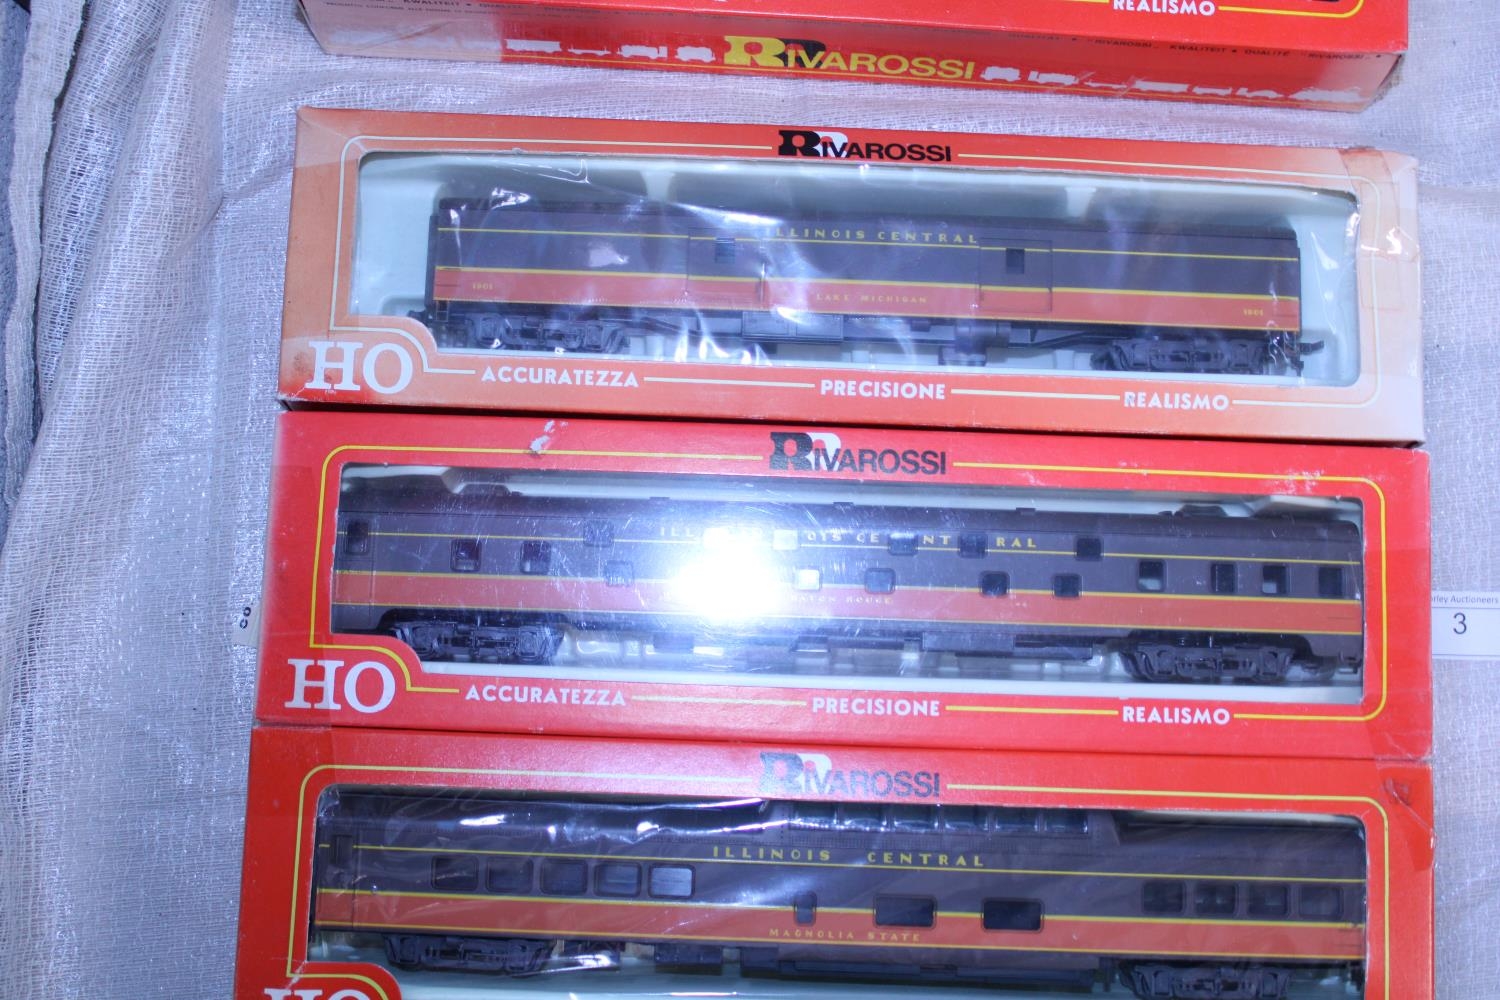 A Rivarossi HO gauge locomotive and two carriages